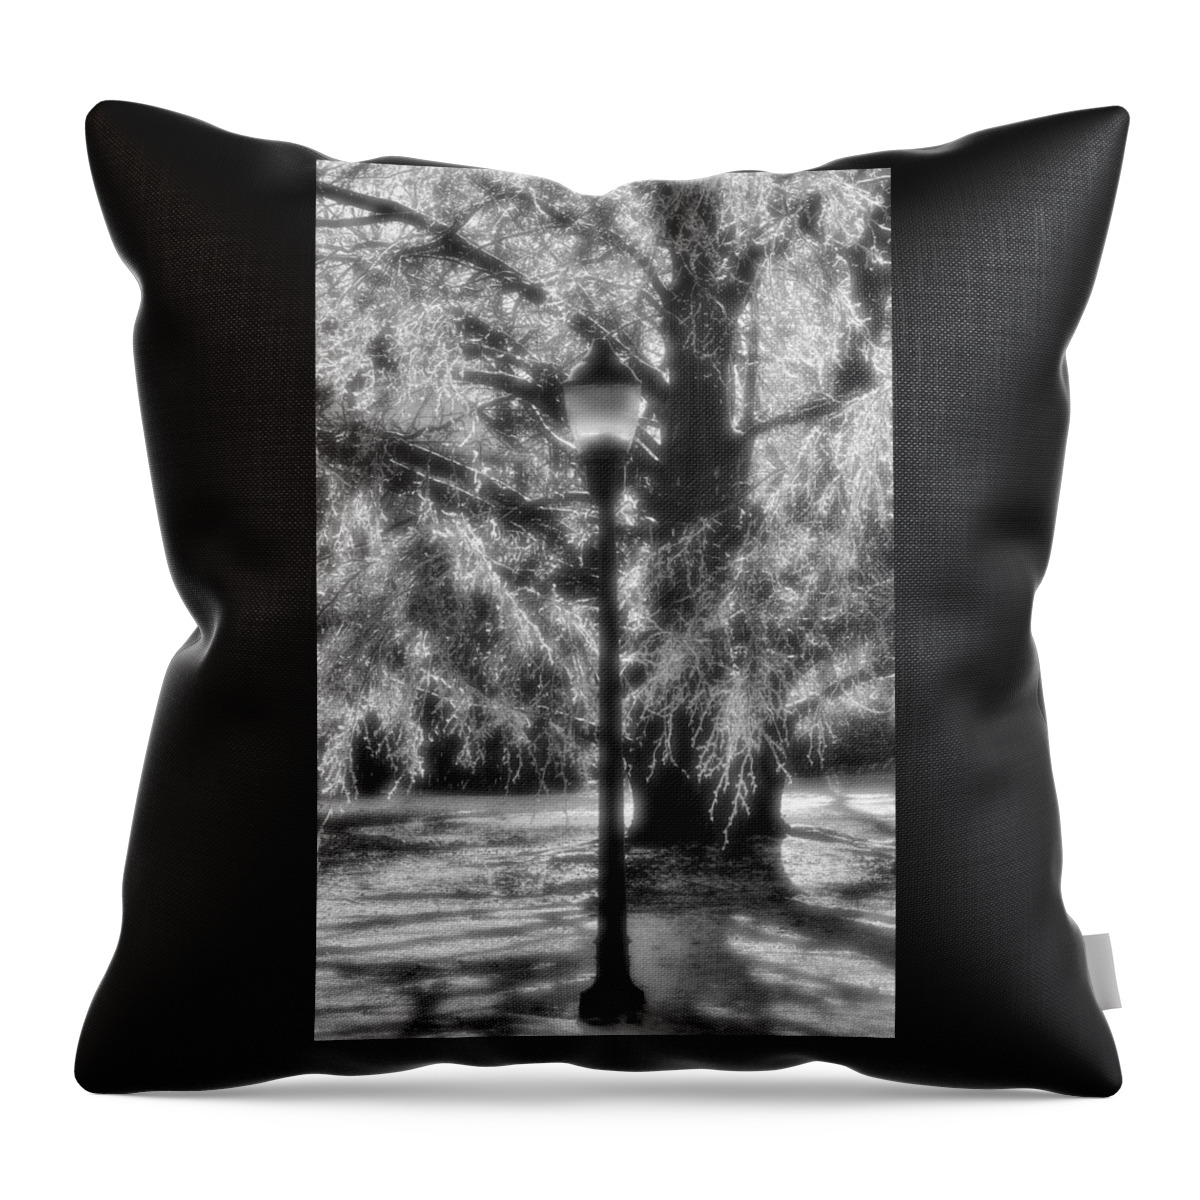 Lamp Throw Pillow featuring the photograph Three Lights by Michael Mazaika